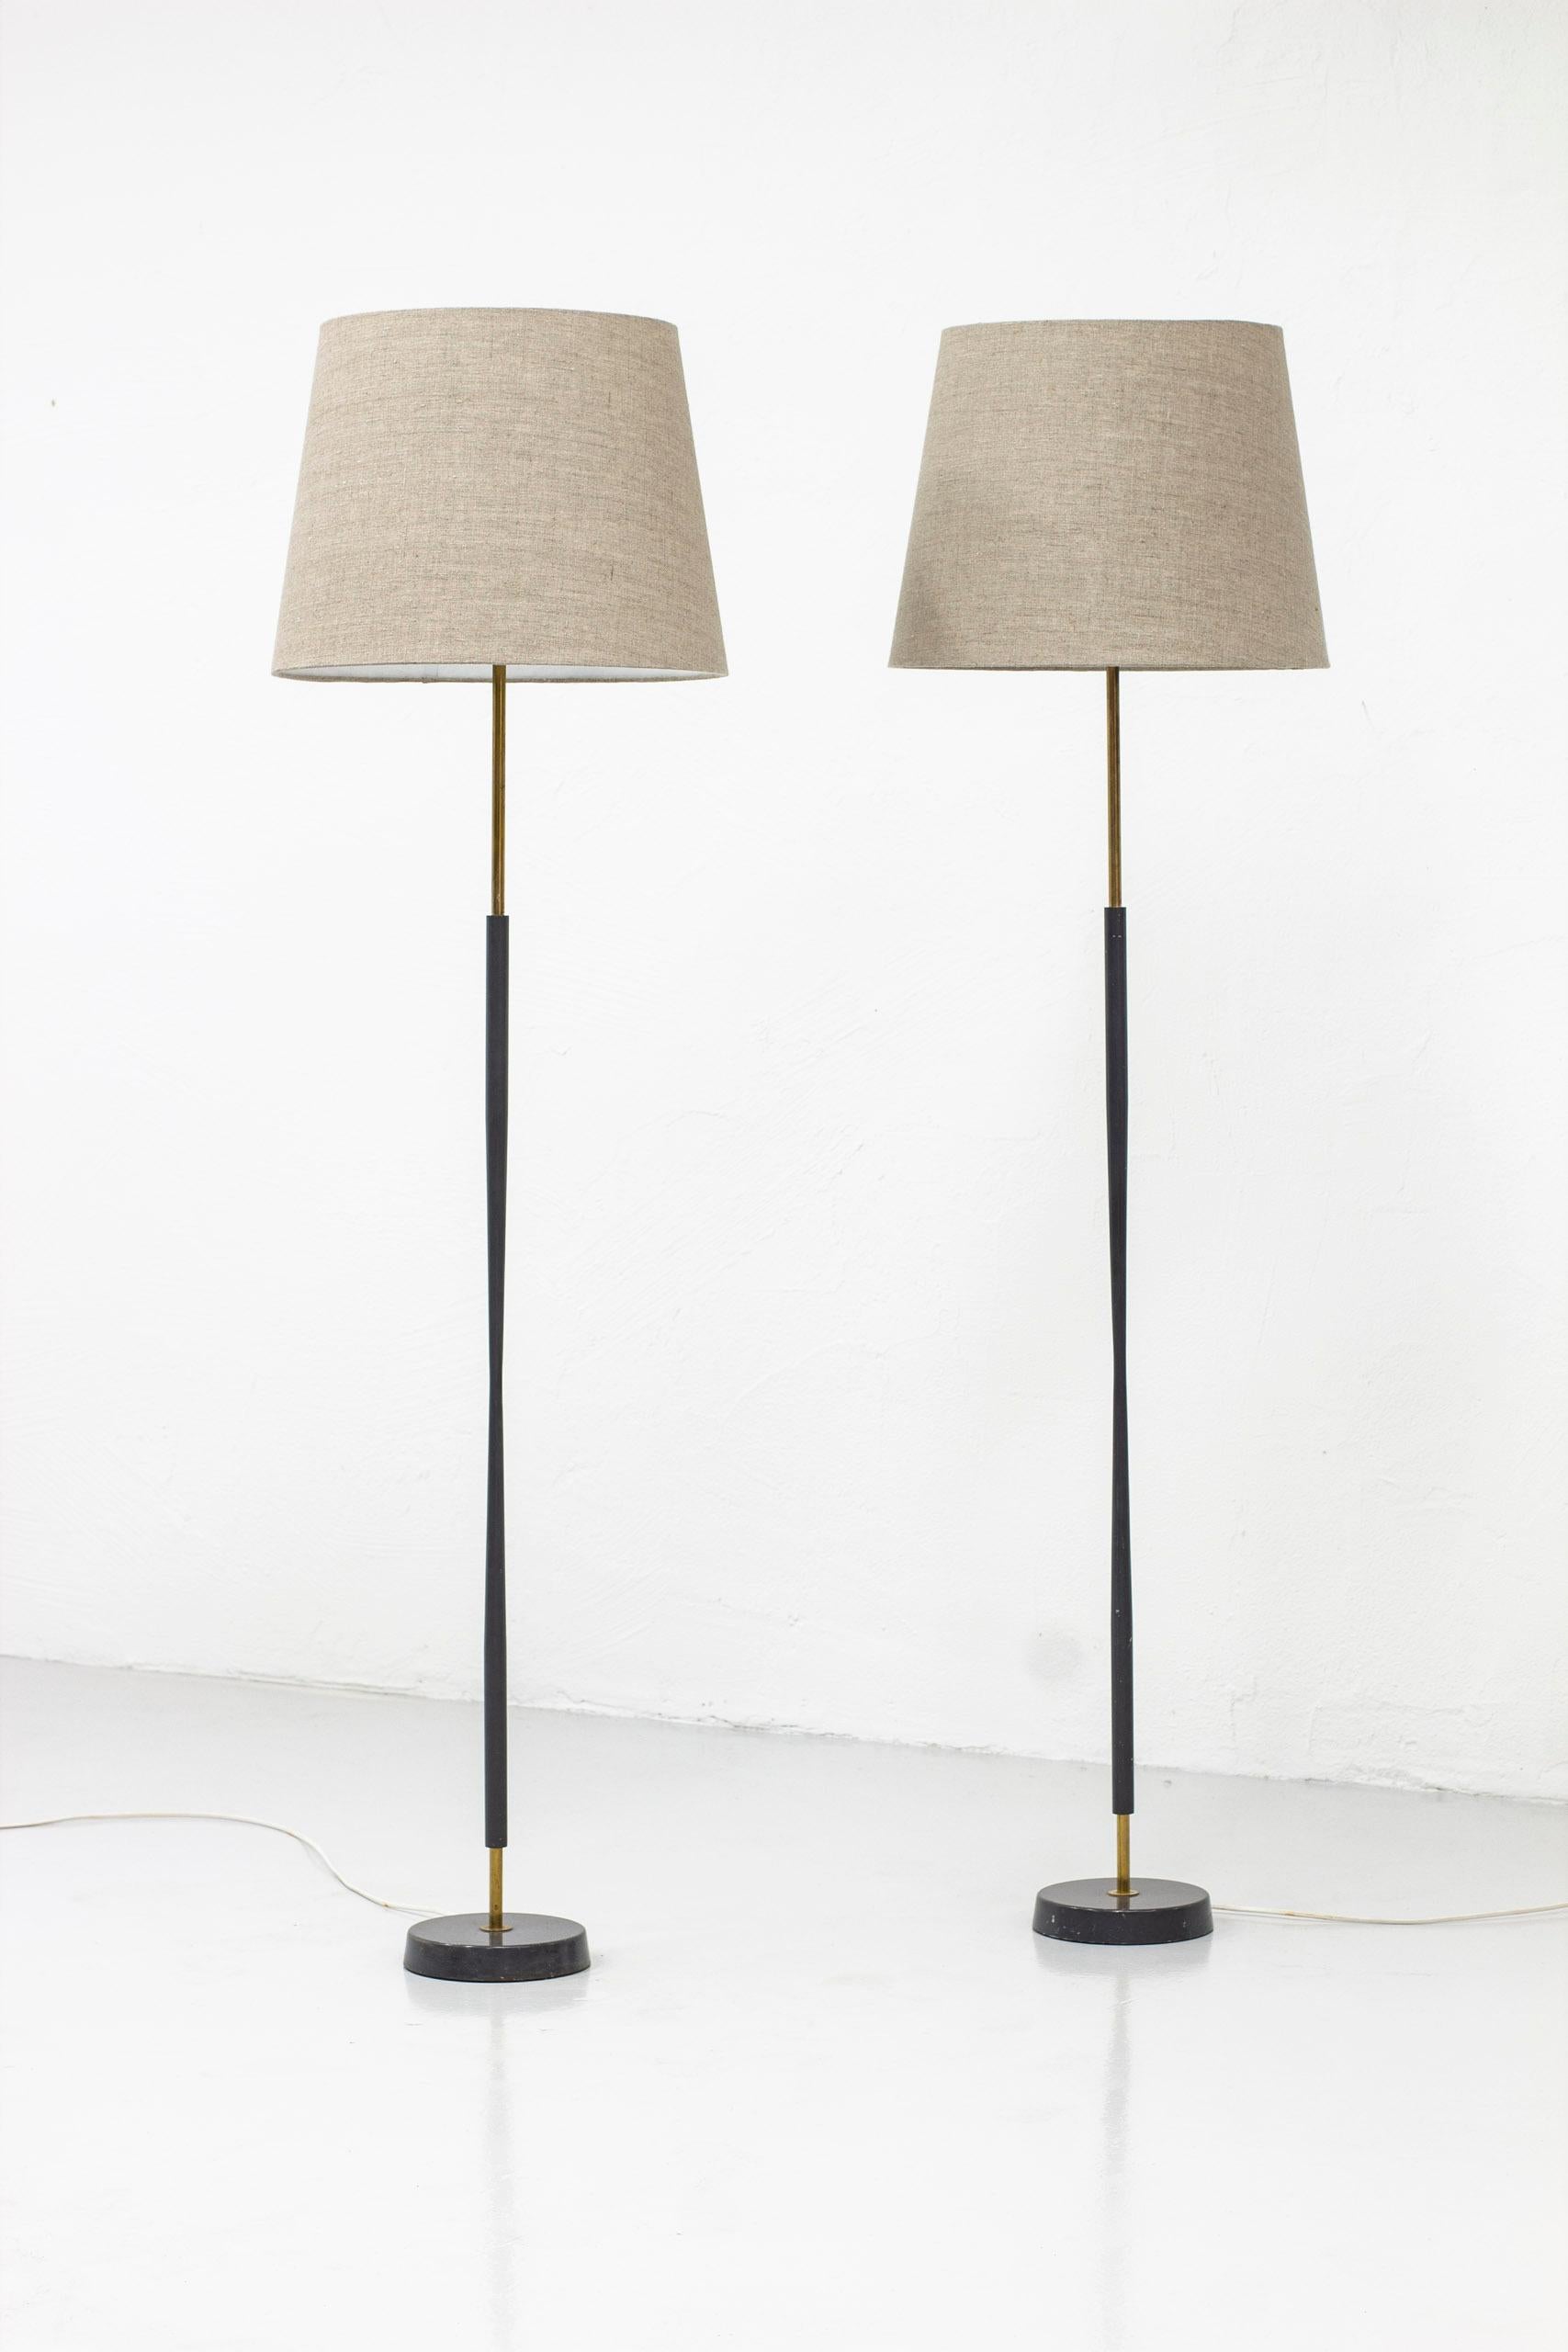 Floor lamps made by ASEA belysning in Sweden during the 1950s. Made from brass with a dark grey lacquer. New grey/natural linen lamp shades. Light switches on the lamp holders in working order. Good vintage condition with age related wear and